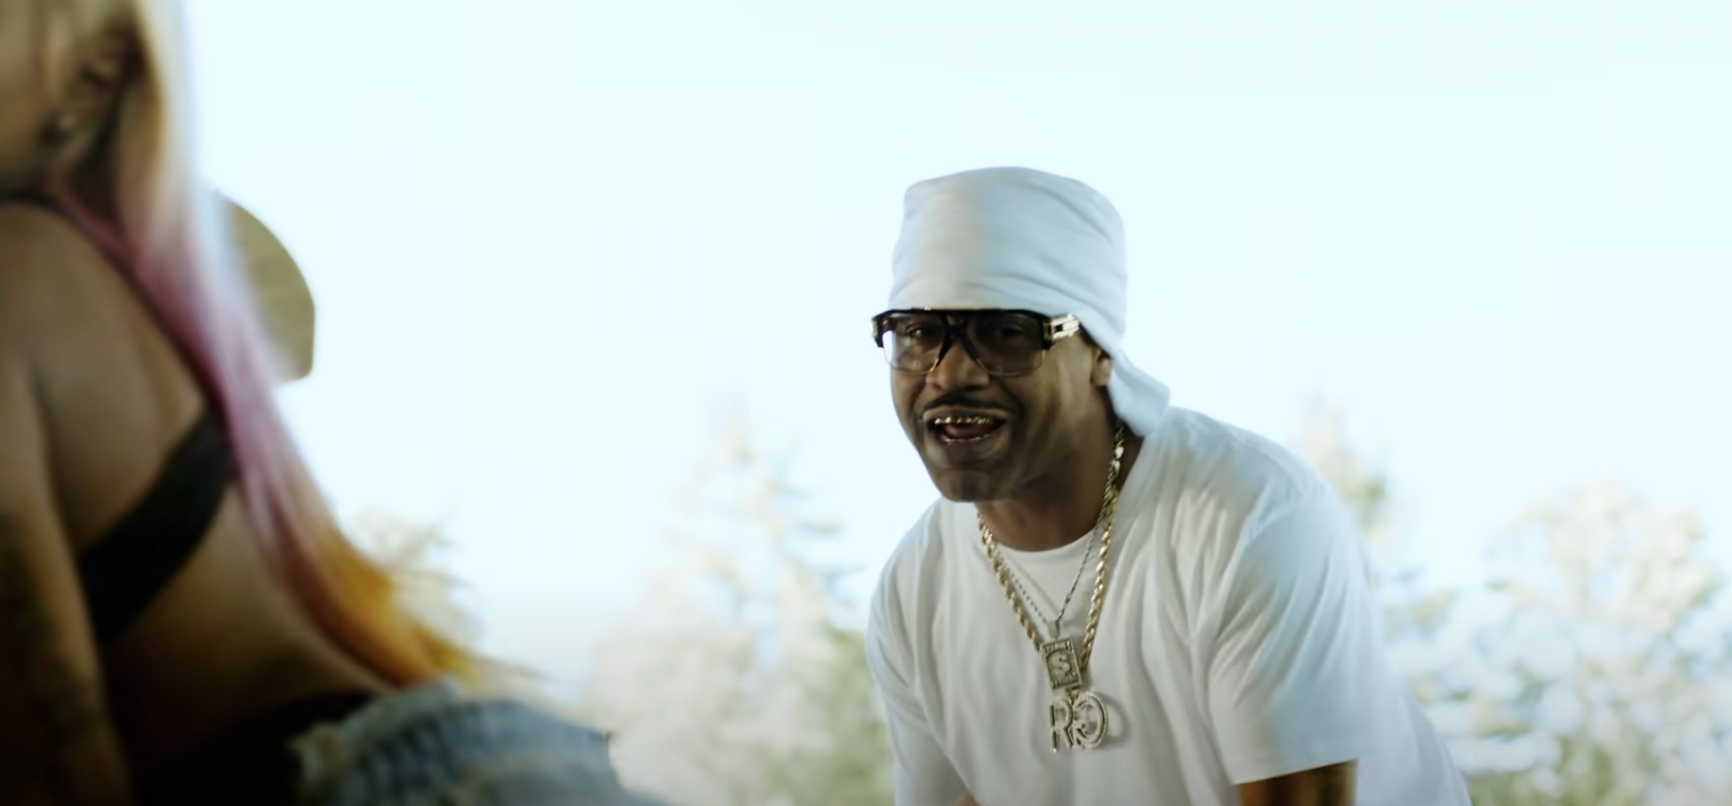 Juvenile adapts 1999 hit 'Back That Thang Up' into pro-vaccine anthem 'Vax That Thang Up'